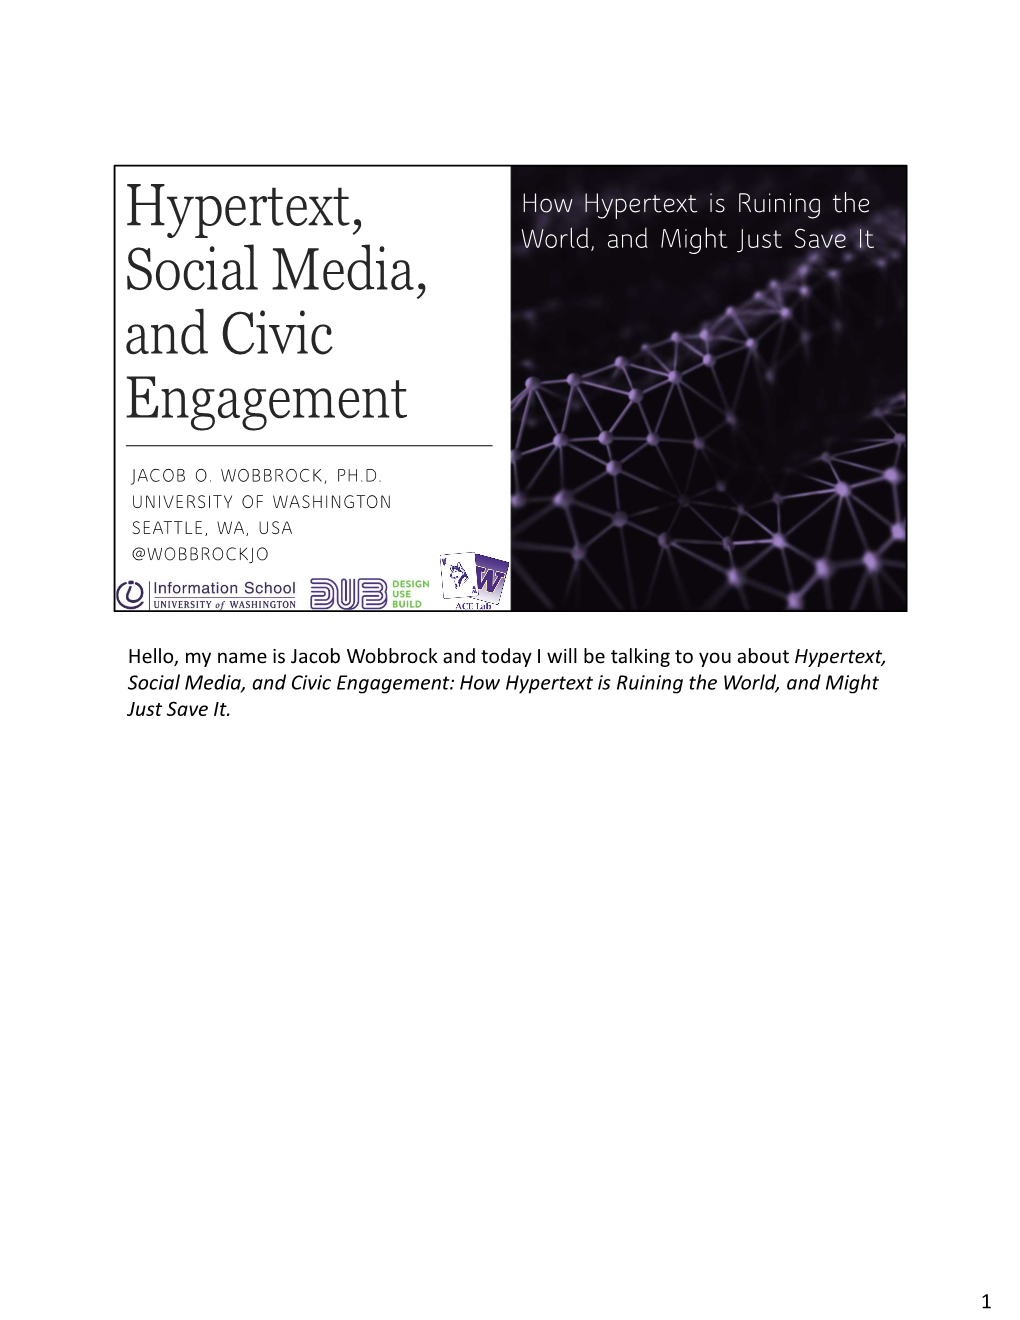 Hypertext, Social Media, and Civic Engagement: How Hypertext Is Ruining the World, and Might Just Save It